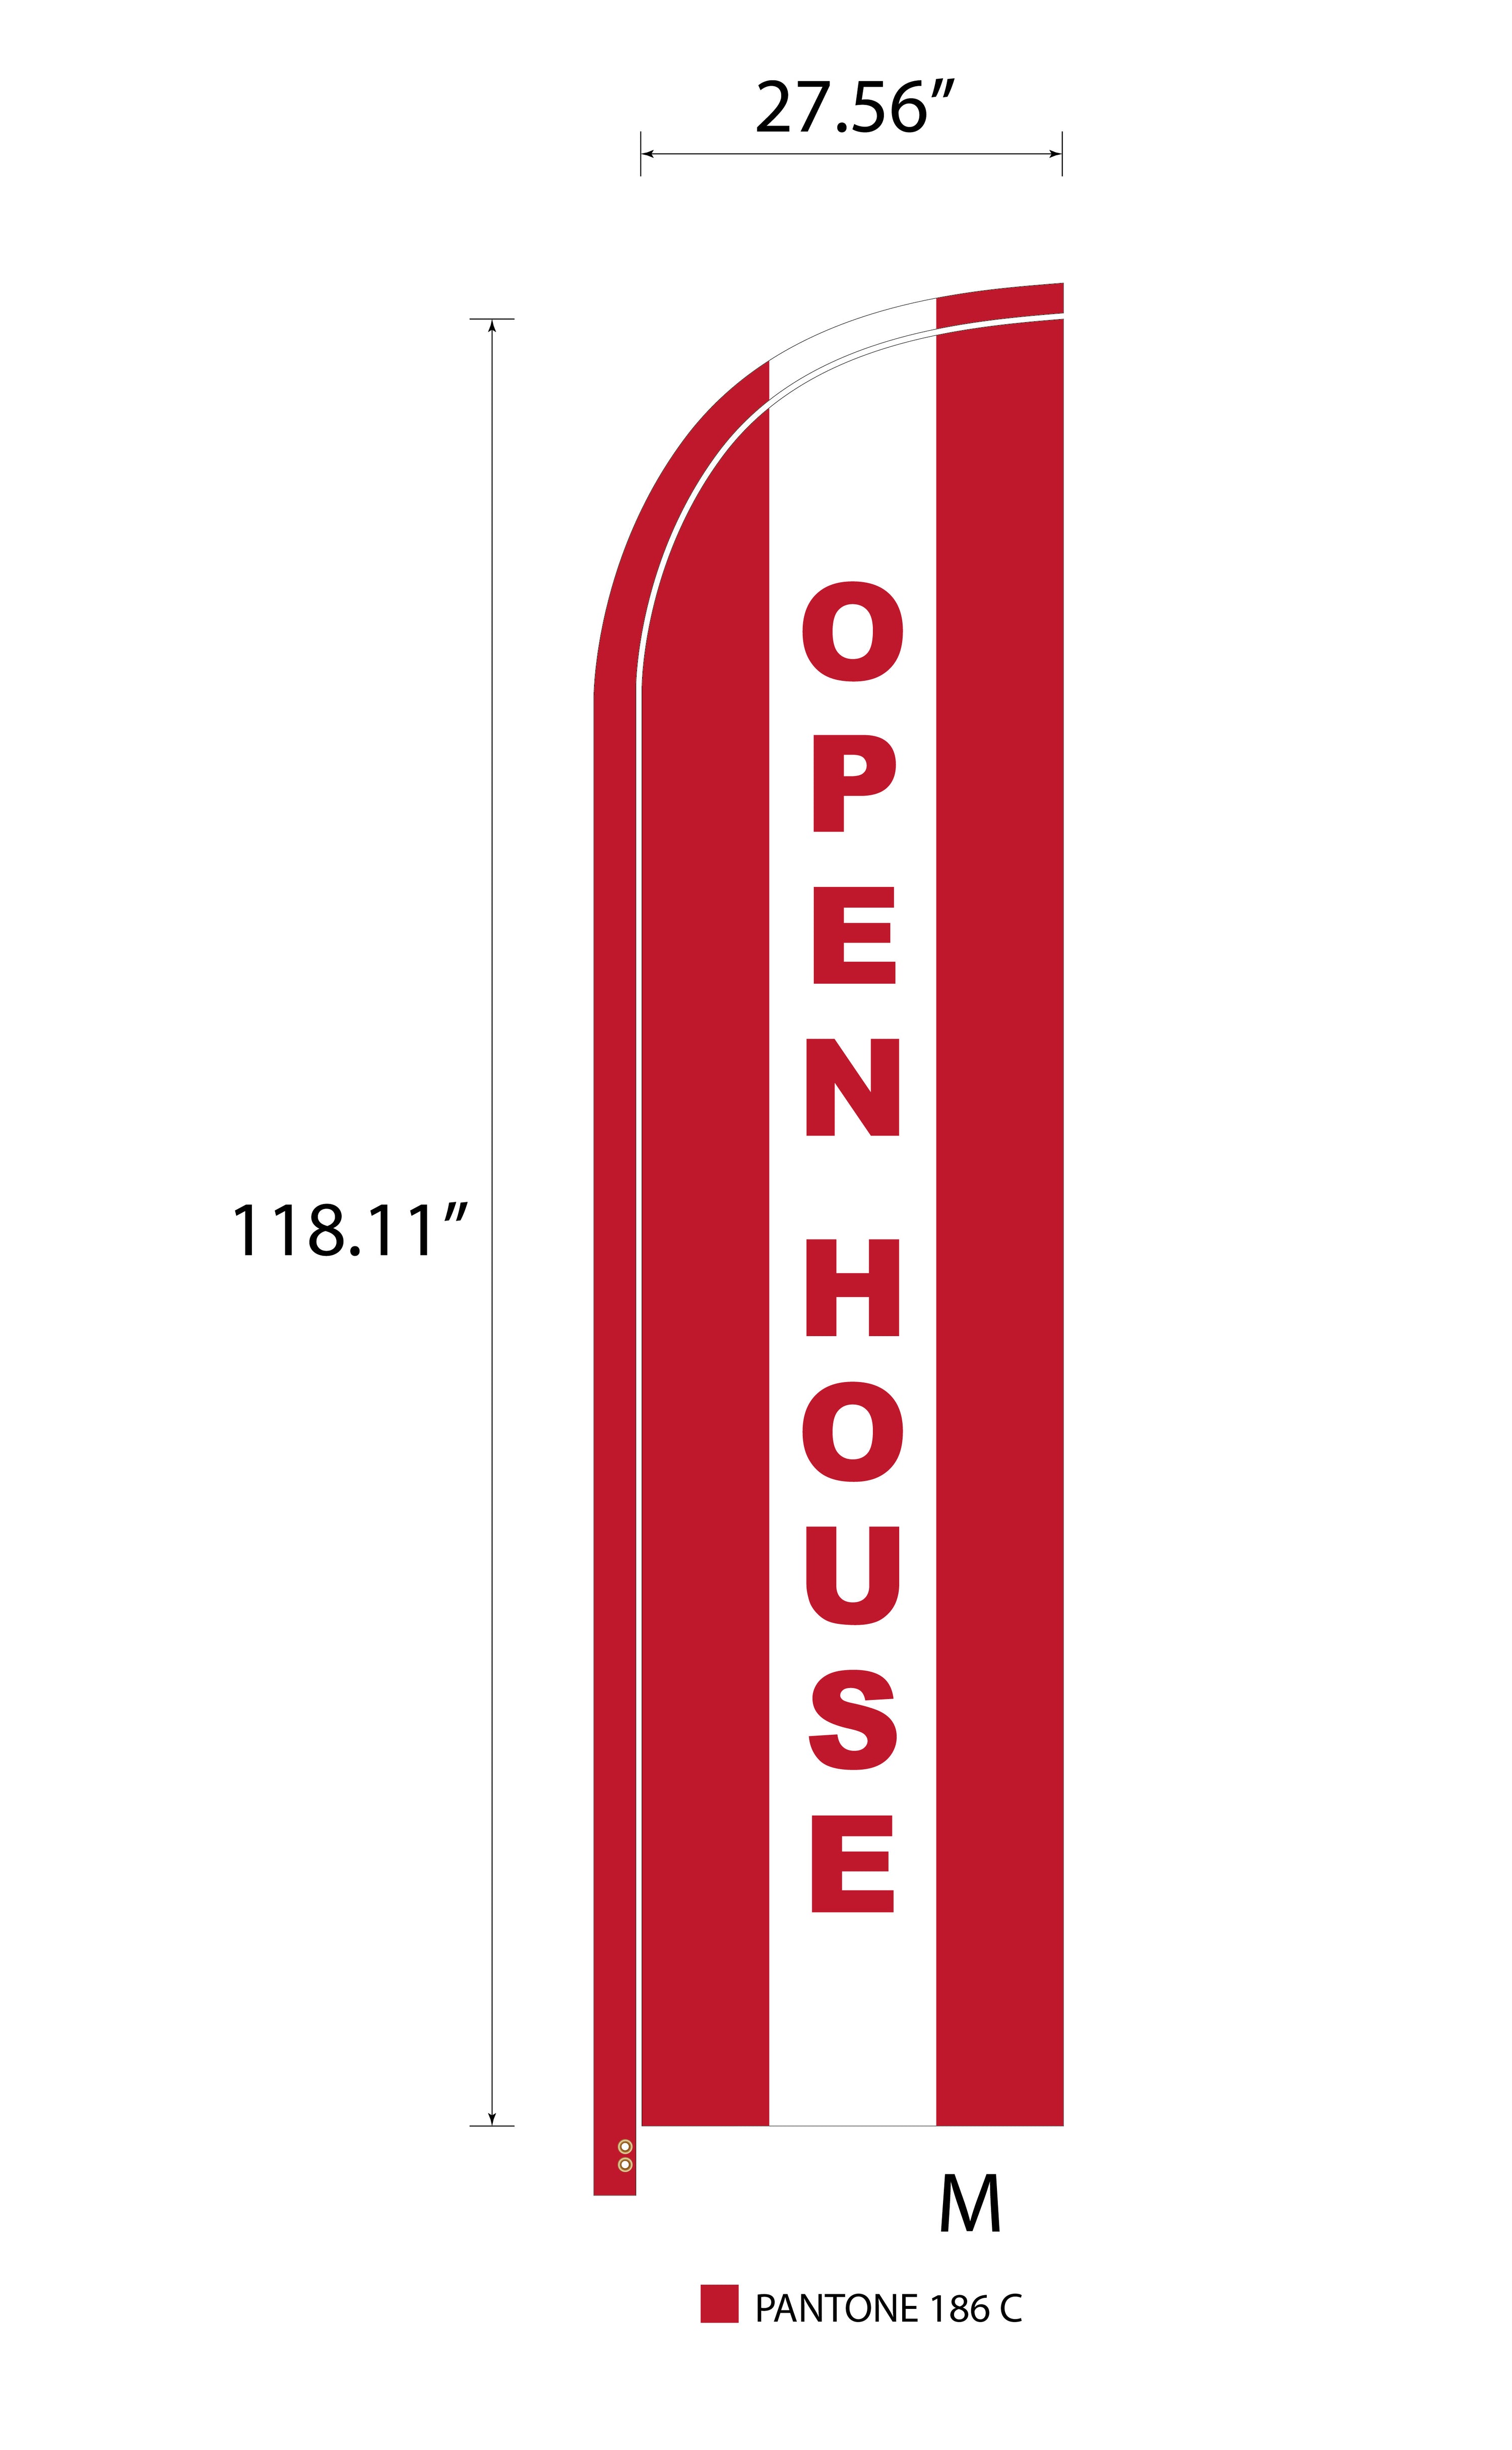 Rausch Coleman Homes OPEN HOUSE Medium 11' Deluxe Blade Sail Flag Complete Set - SINGLE-SIDED - Flag and Pole Kit with Spike and Carry Bag